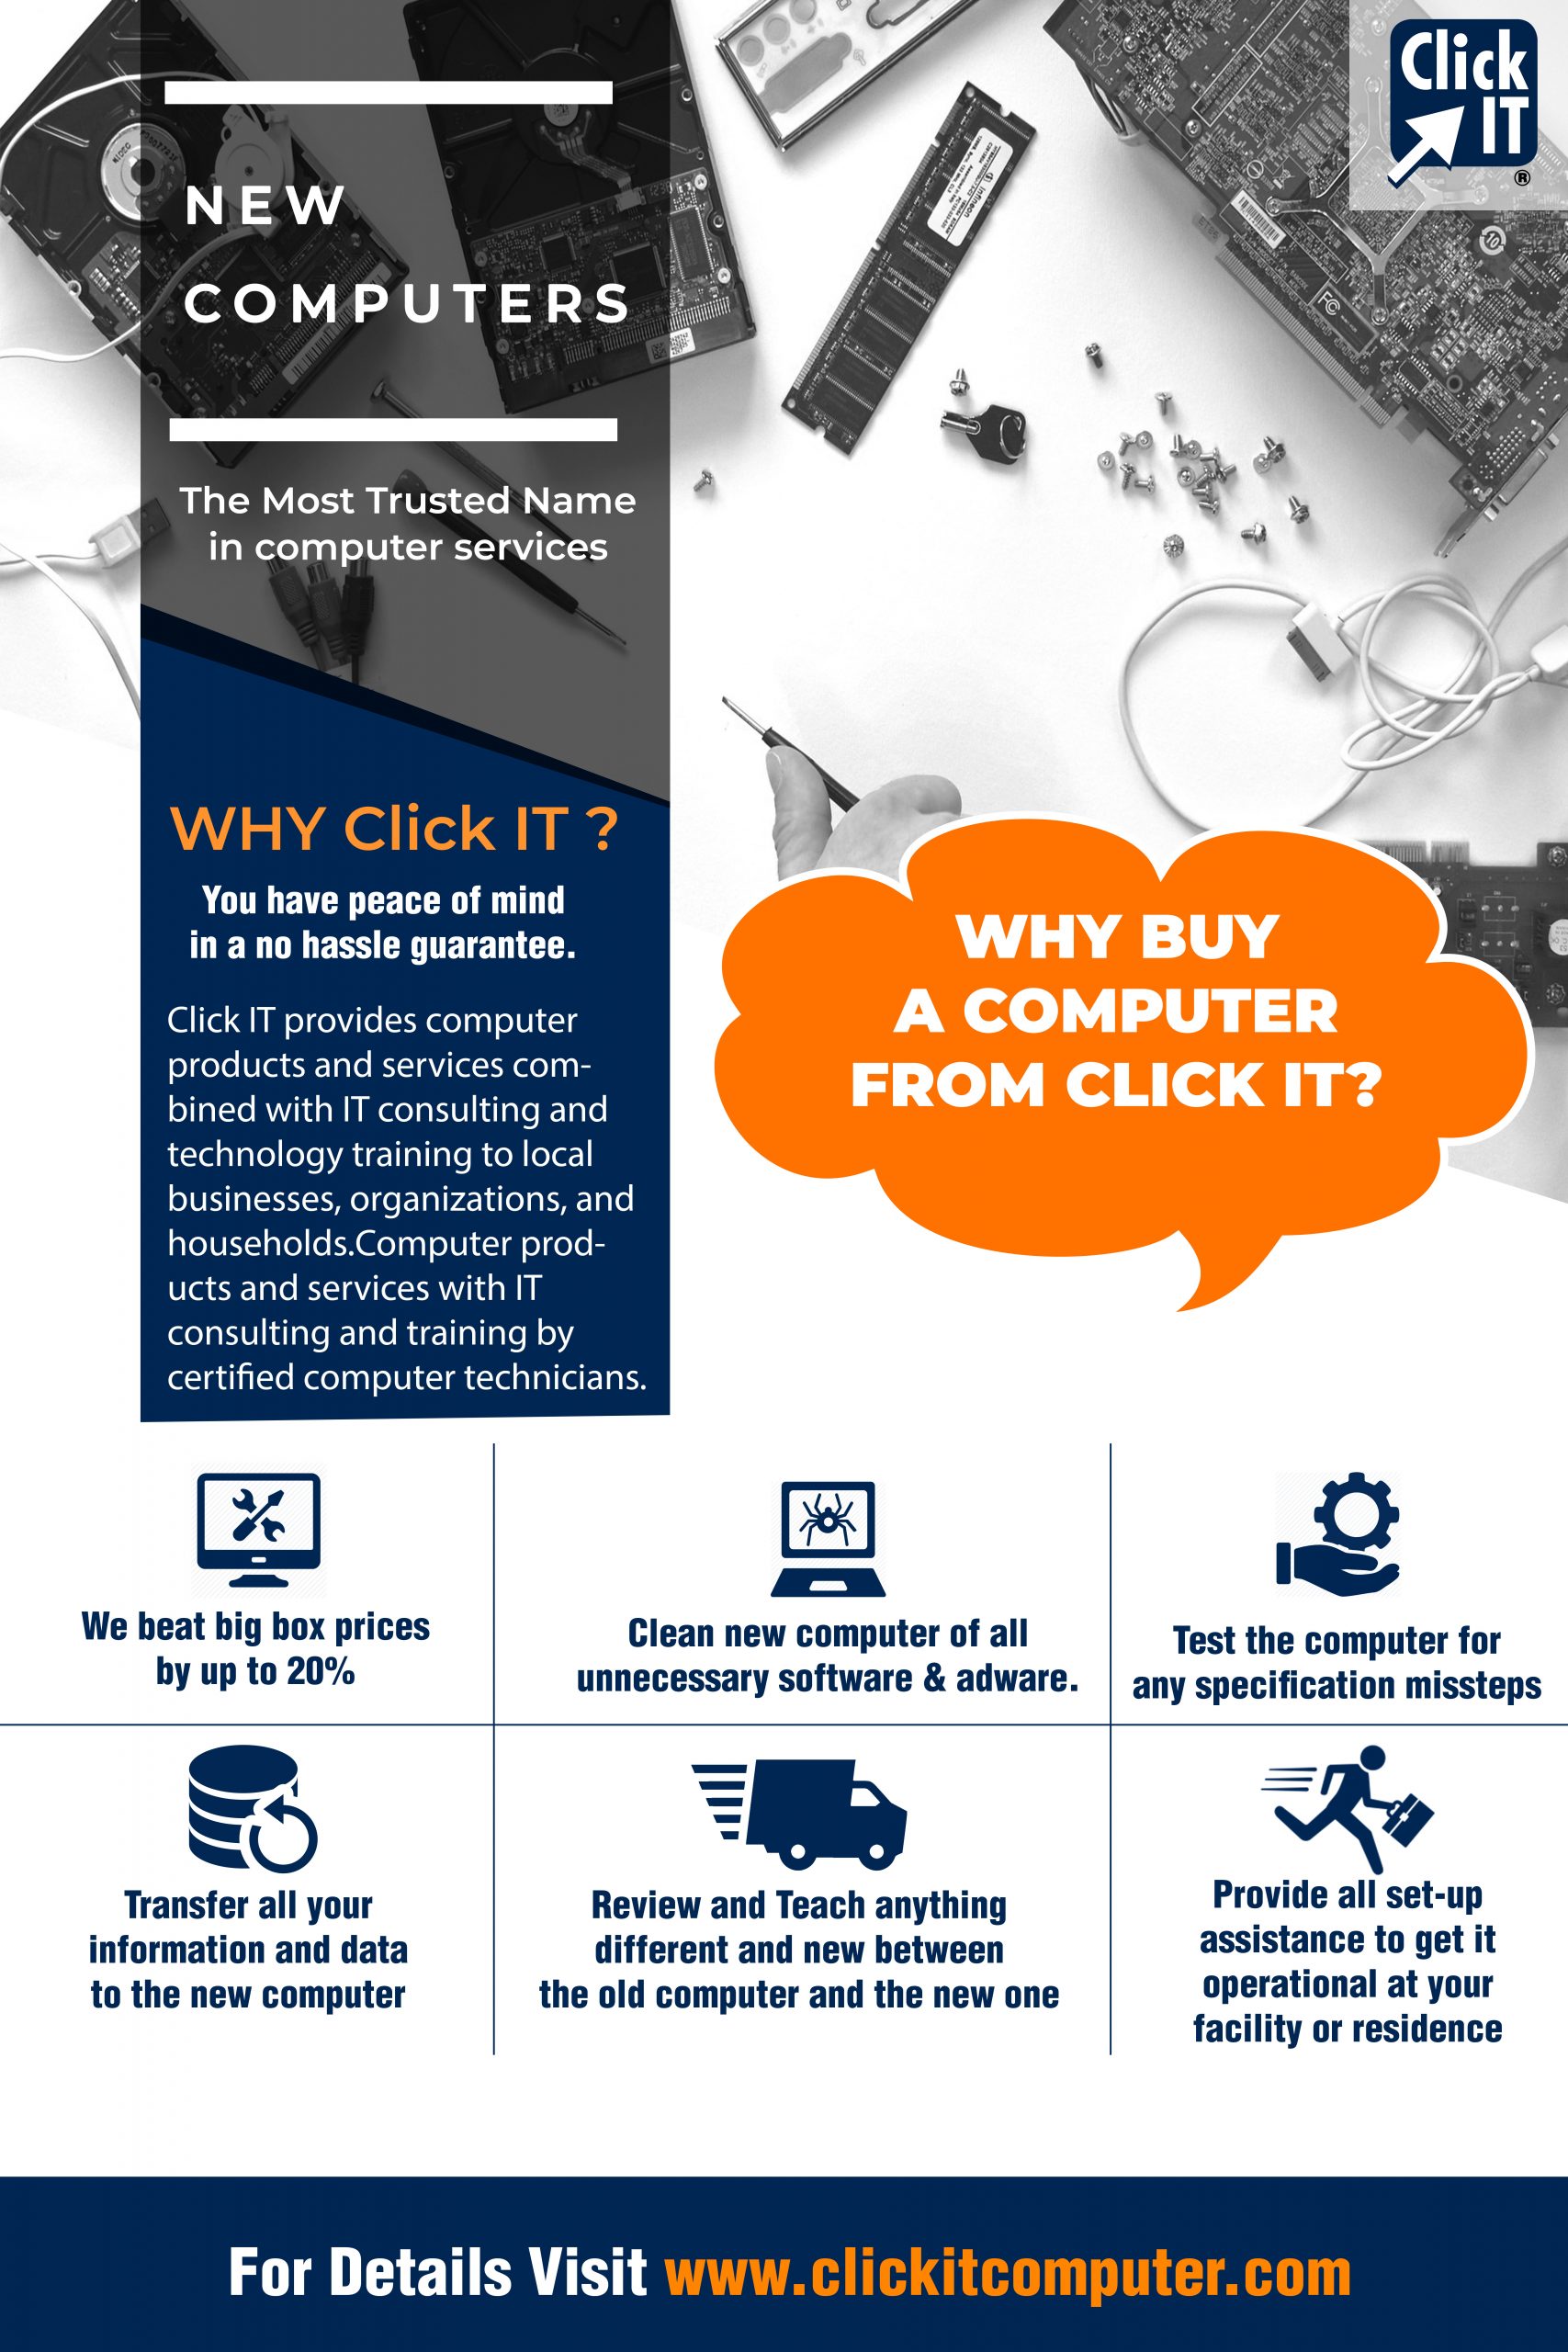 Why-buy-a-computer-from-Click-iT-updated